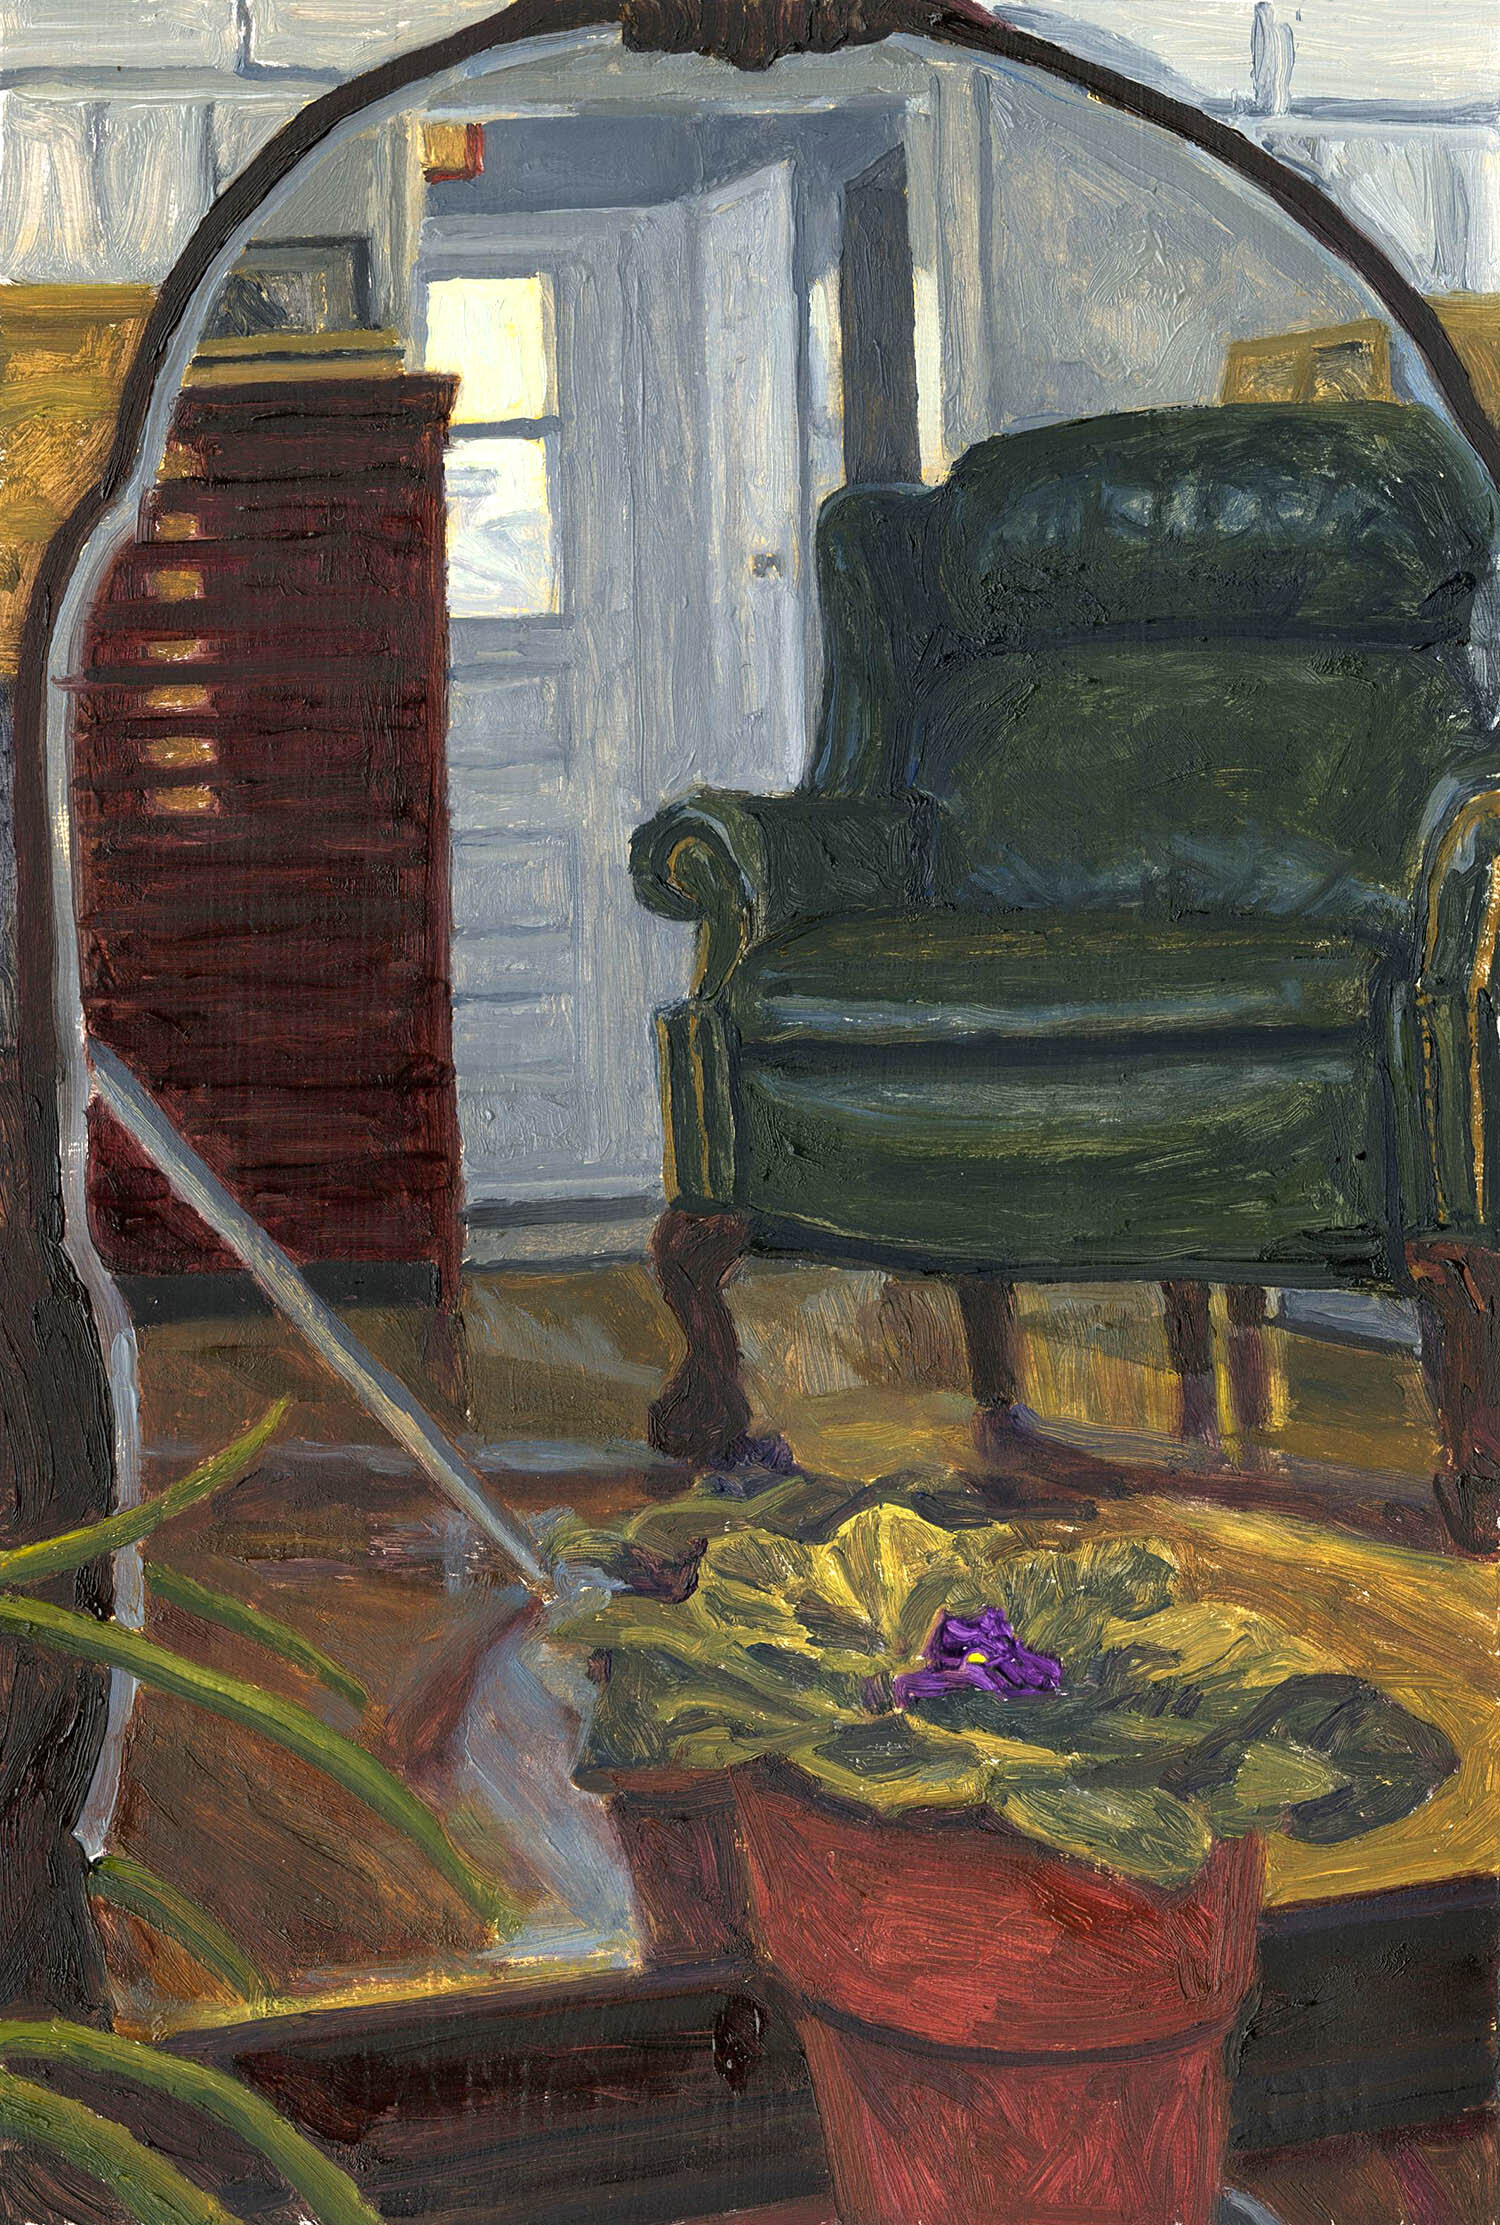 Green Chair in Mirror (1-hour painting)